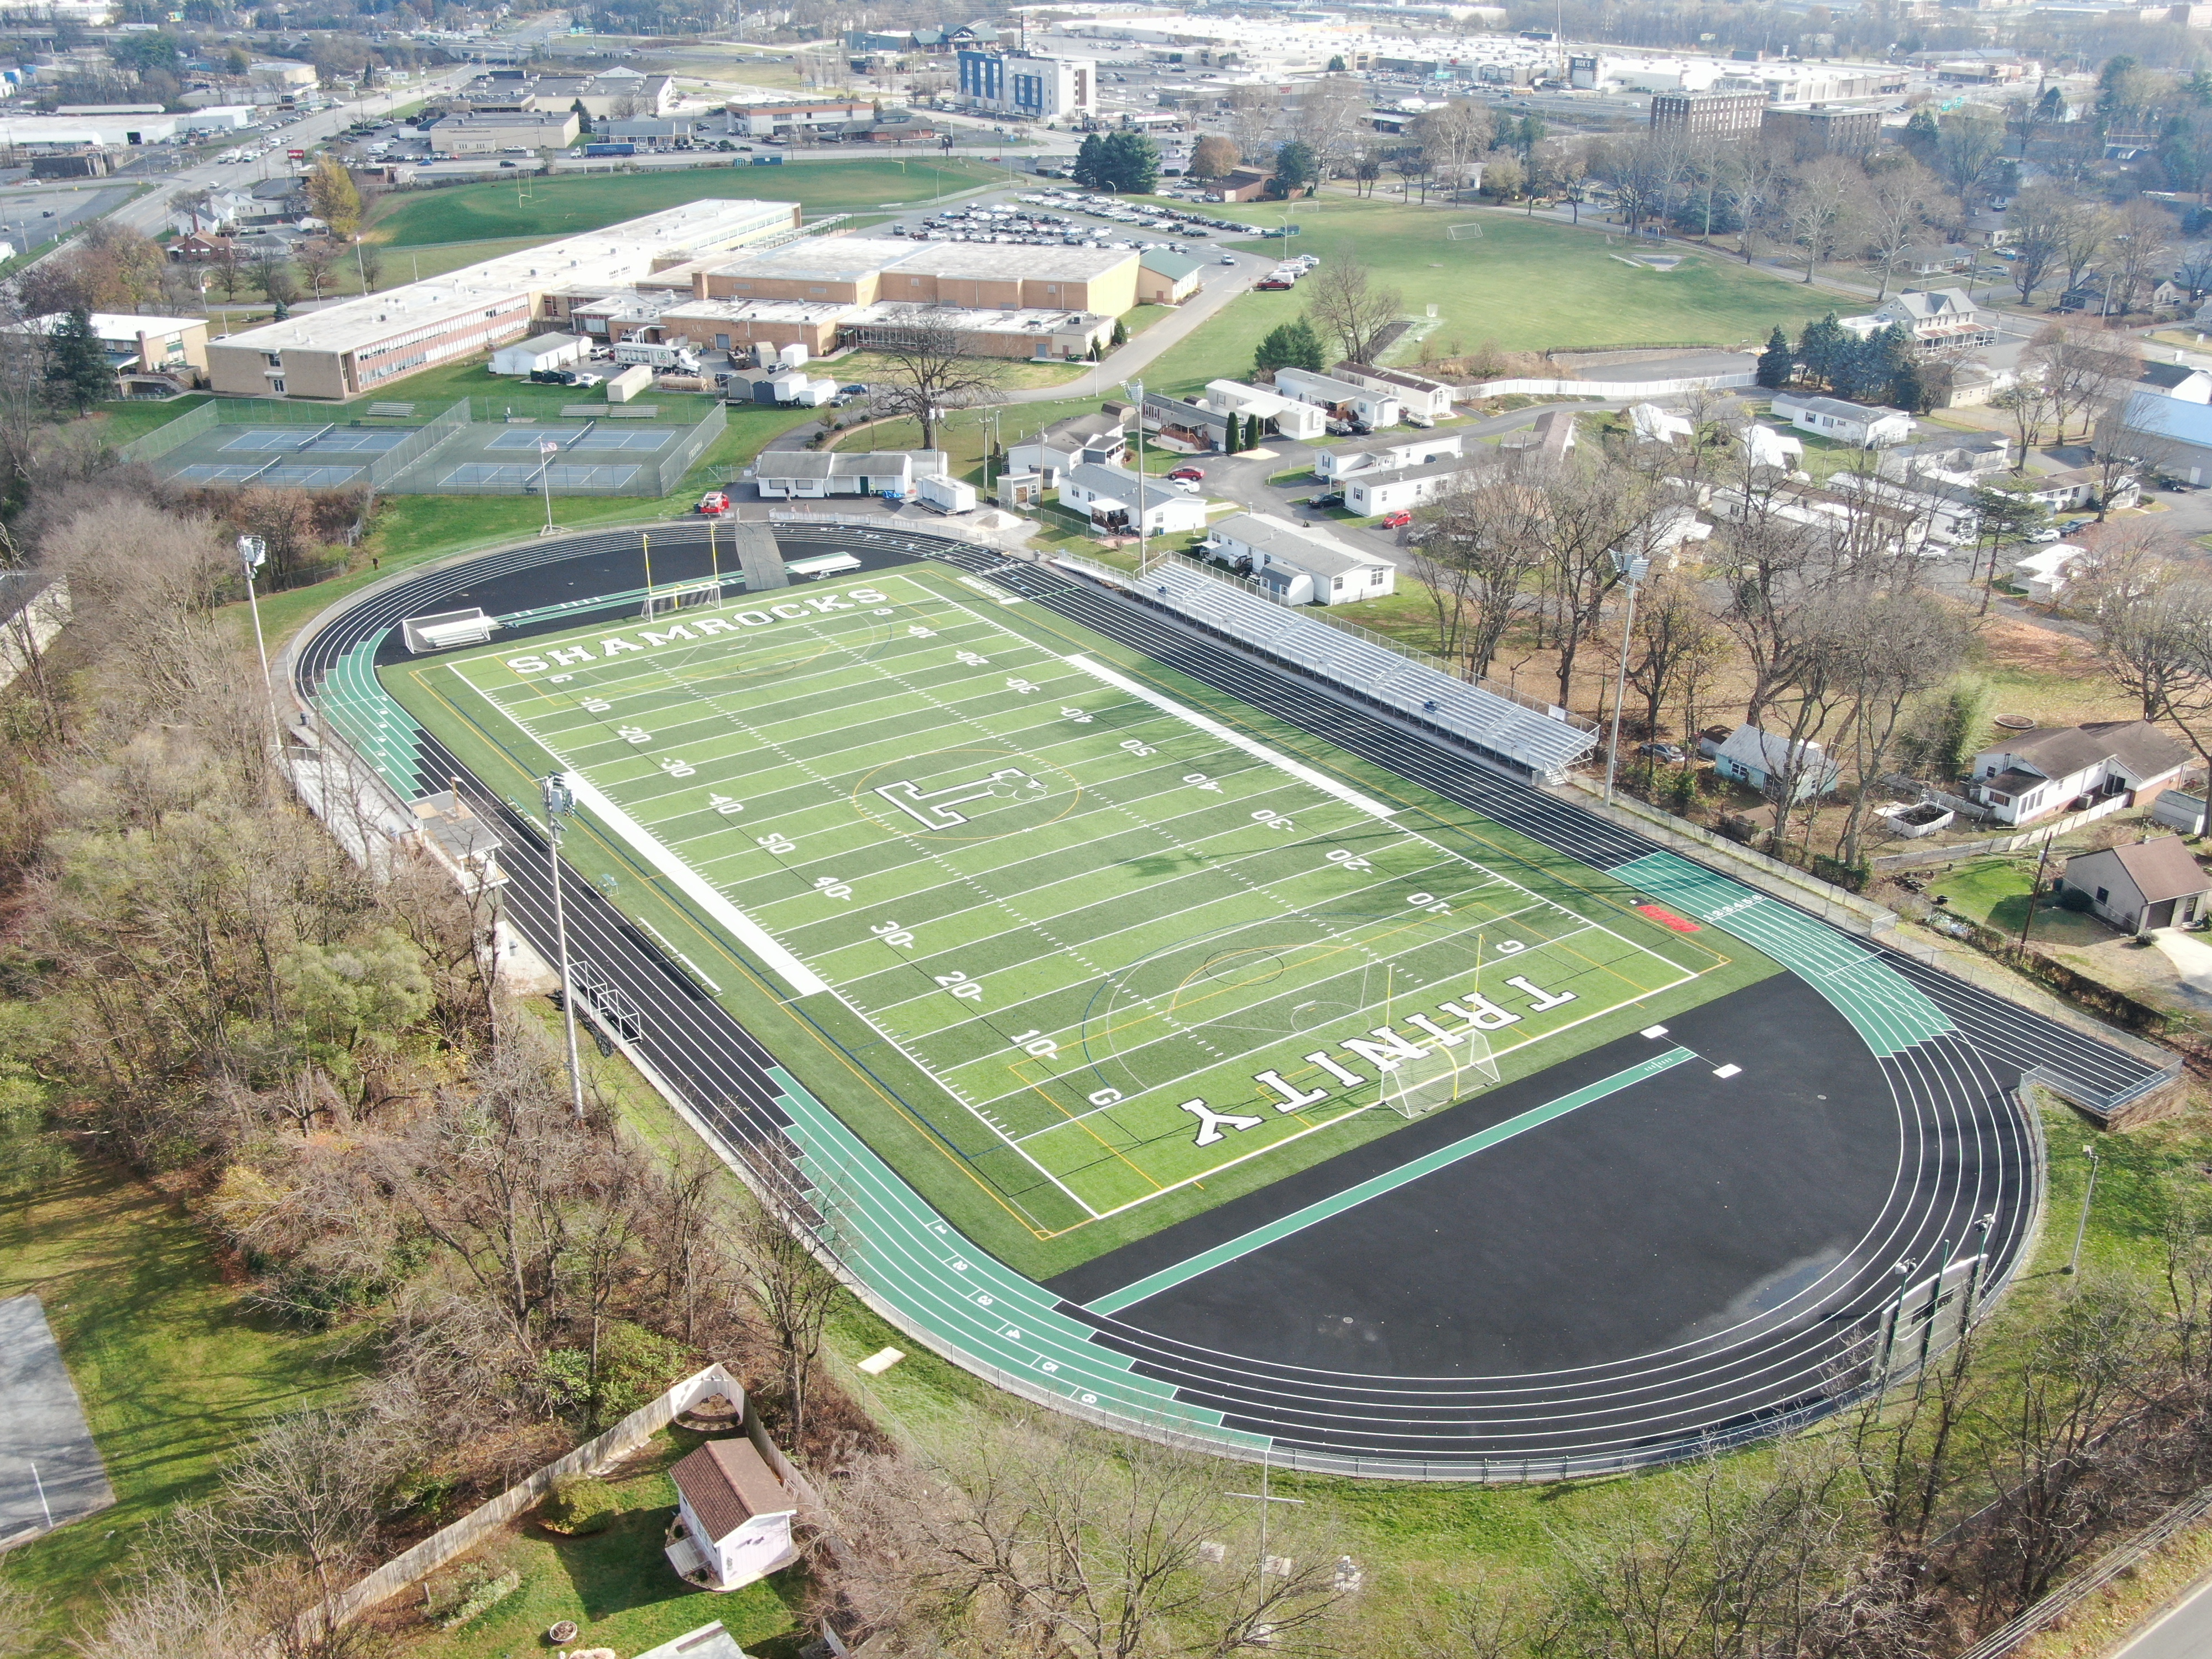 Check out Trinity's new track and football field from the sky